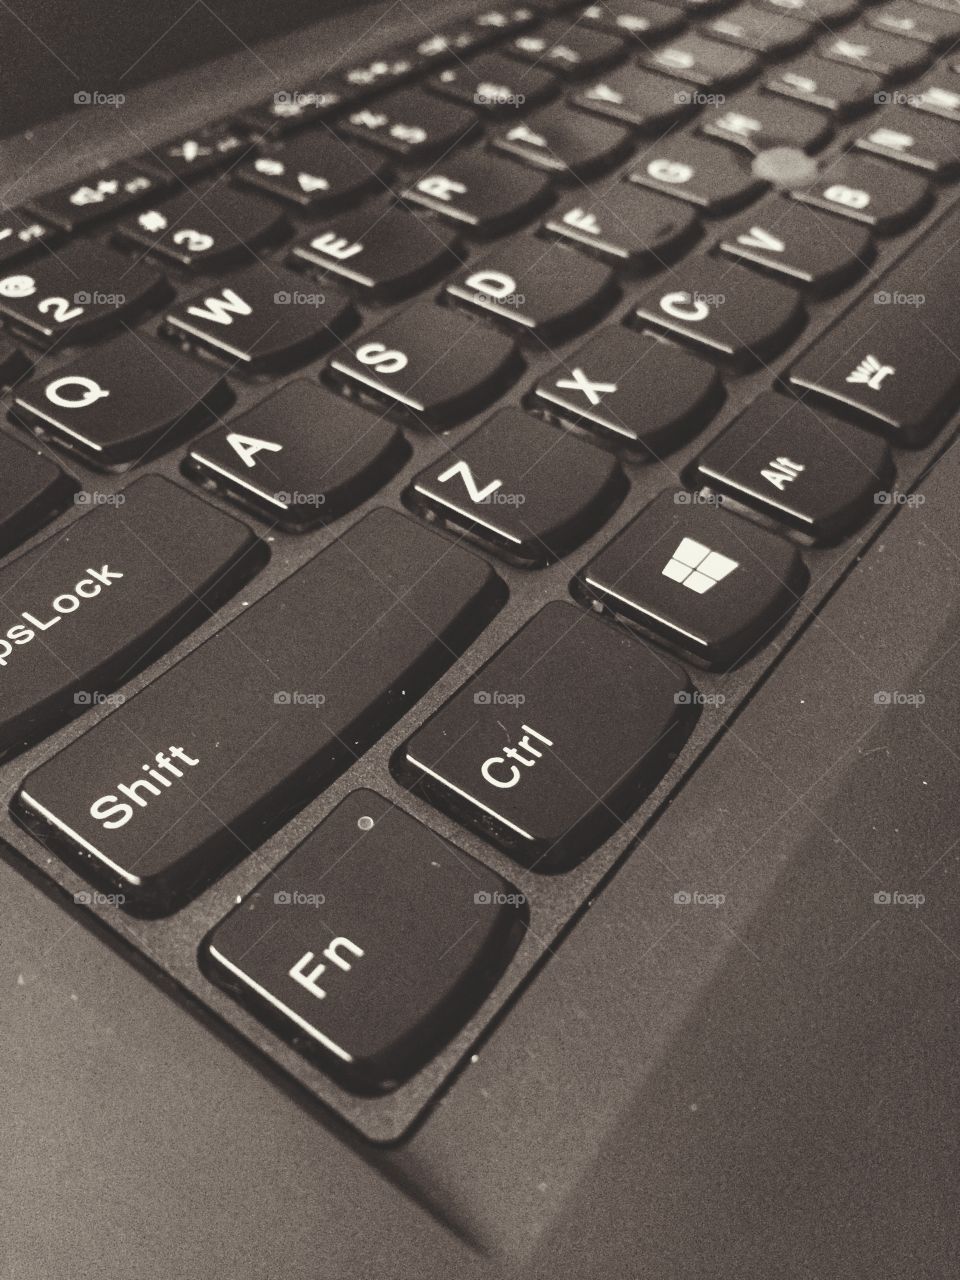 A keyboard from a modern laptop. It is black and focuses on the bottom left corner of the keyboard.